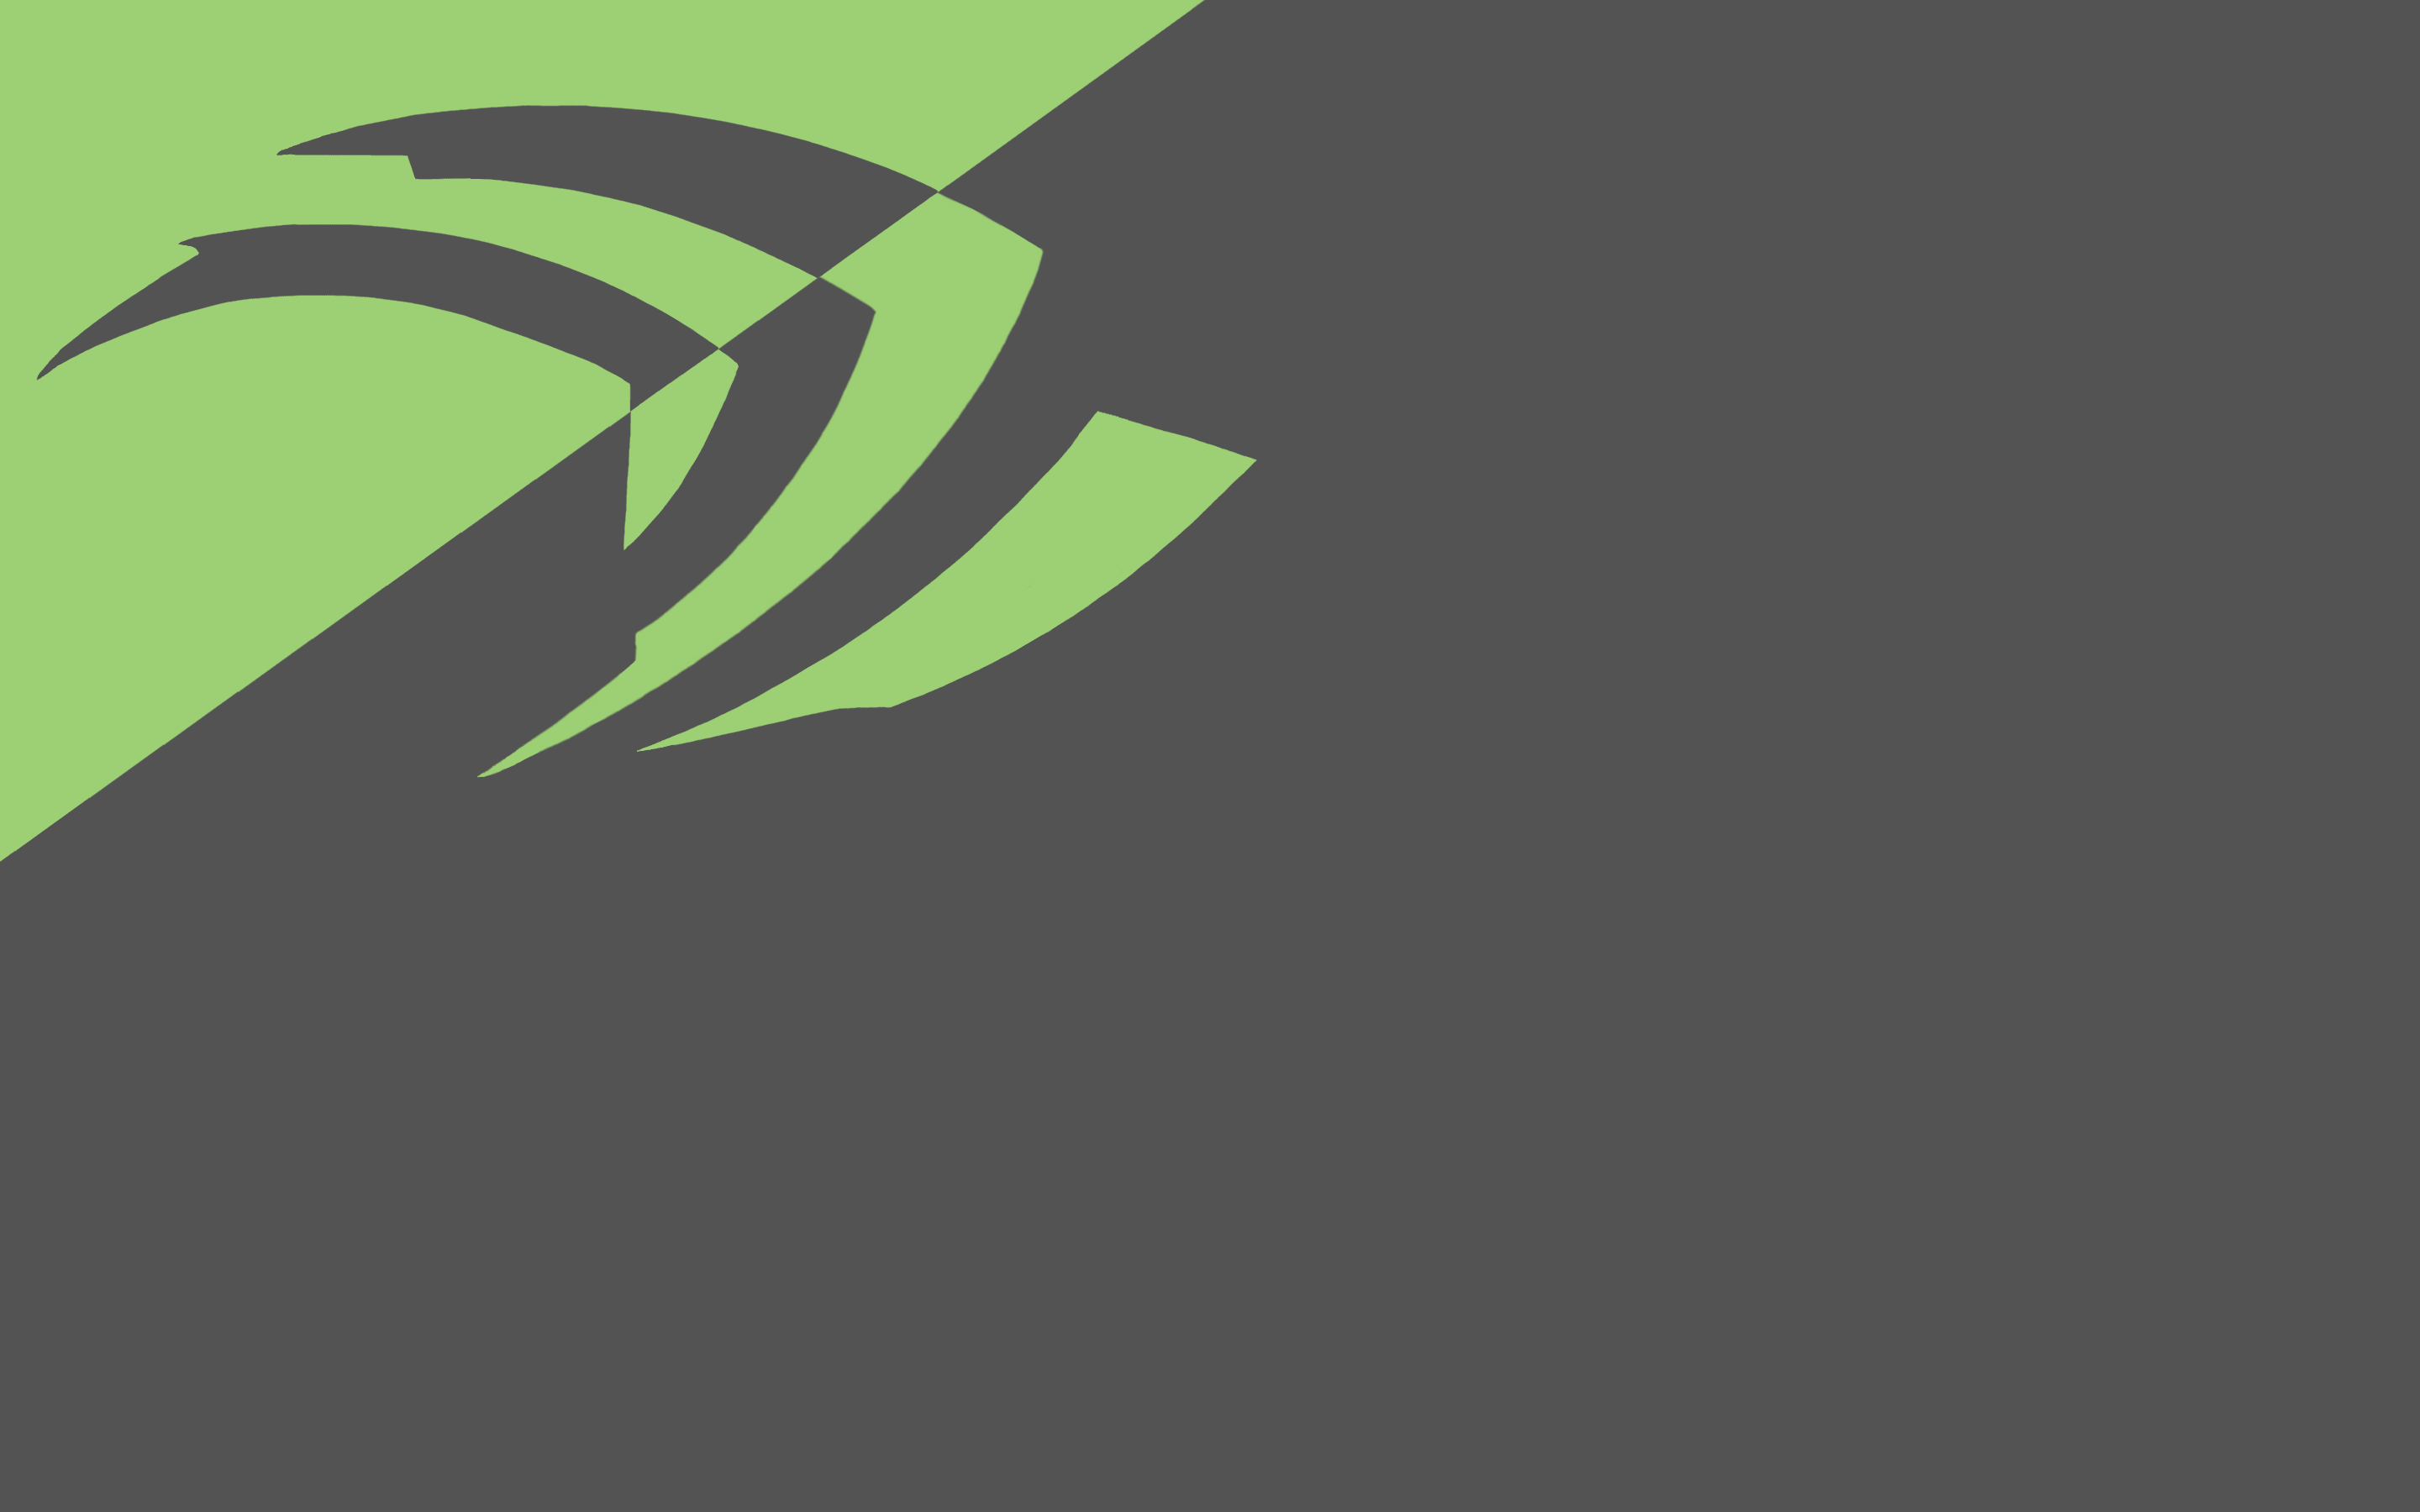 wallpaper.wiki-Nvidia-Backgrounds-Free-Download-PIC-WPE002184